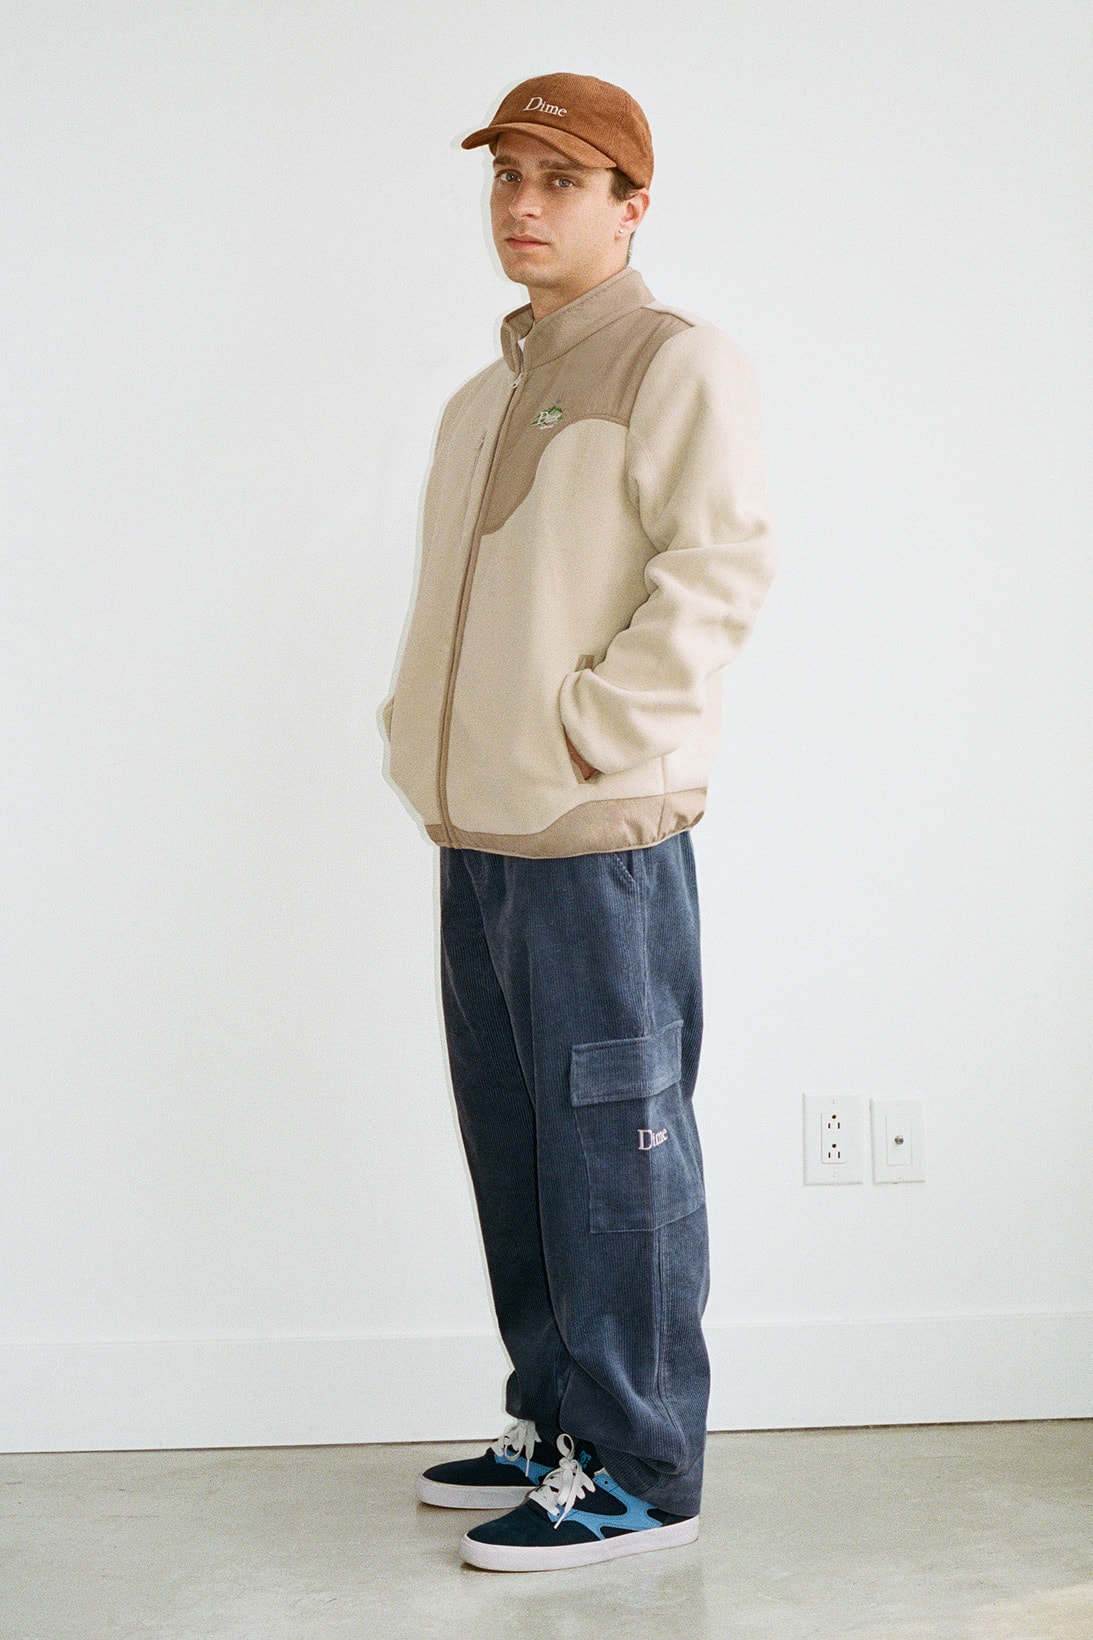 Dime Fall 2021 Drop 1 Collection Lookbook Hat Jacket Pants SNeakers